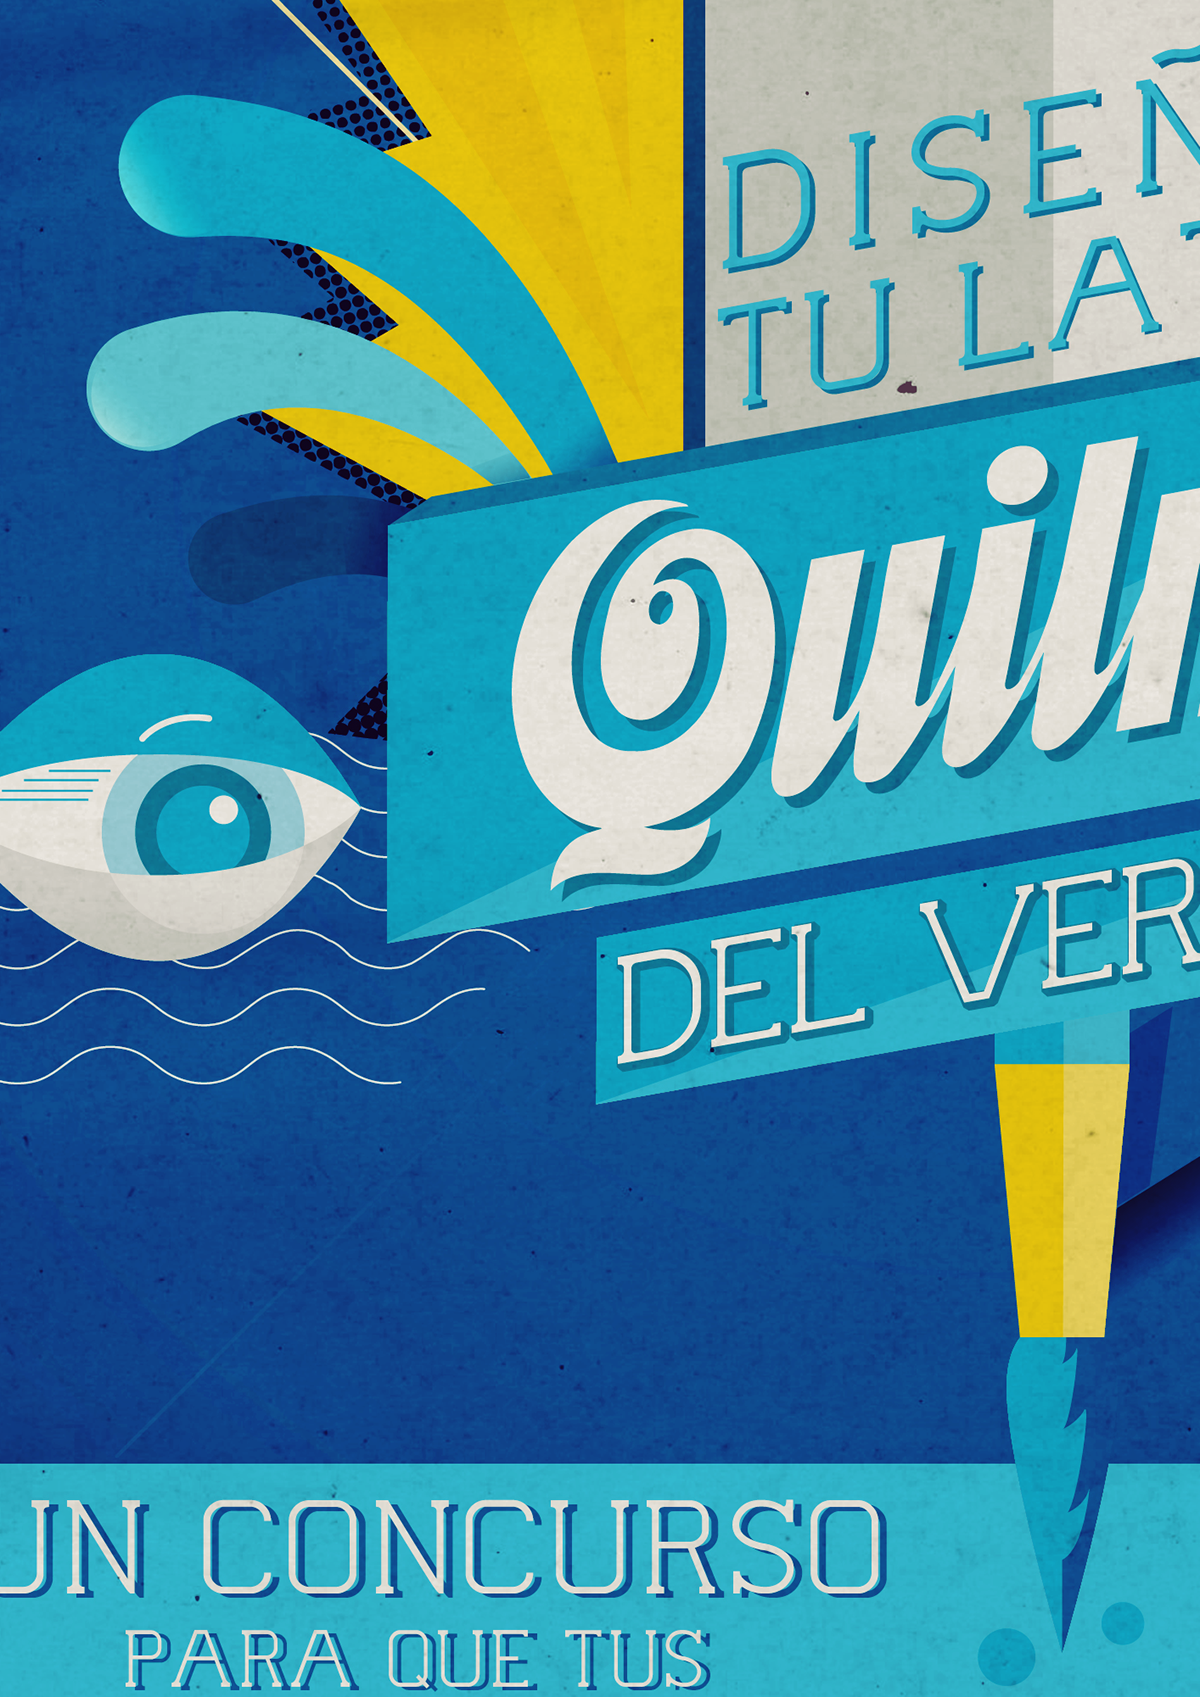 quilmes vector summer buenos aires argentina poster beer